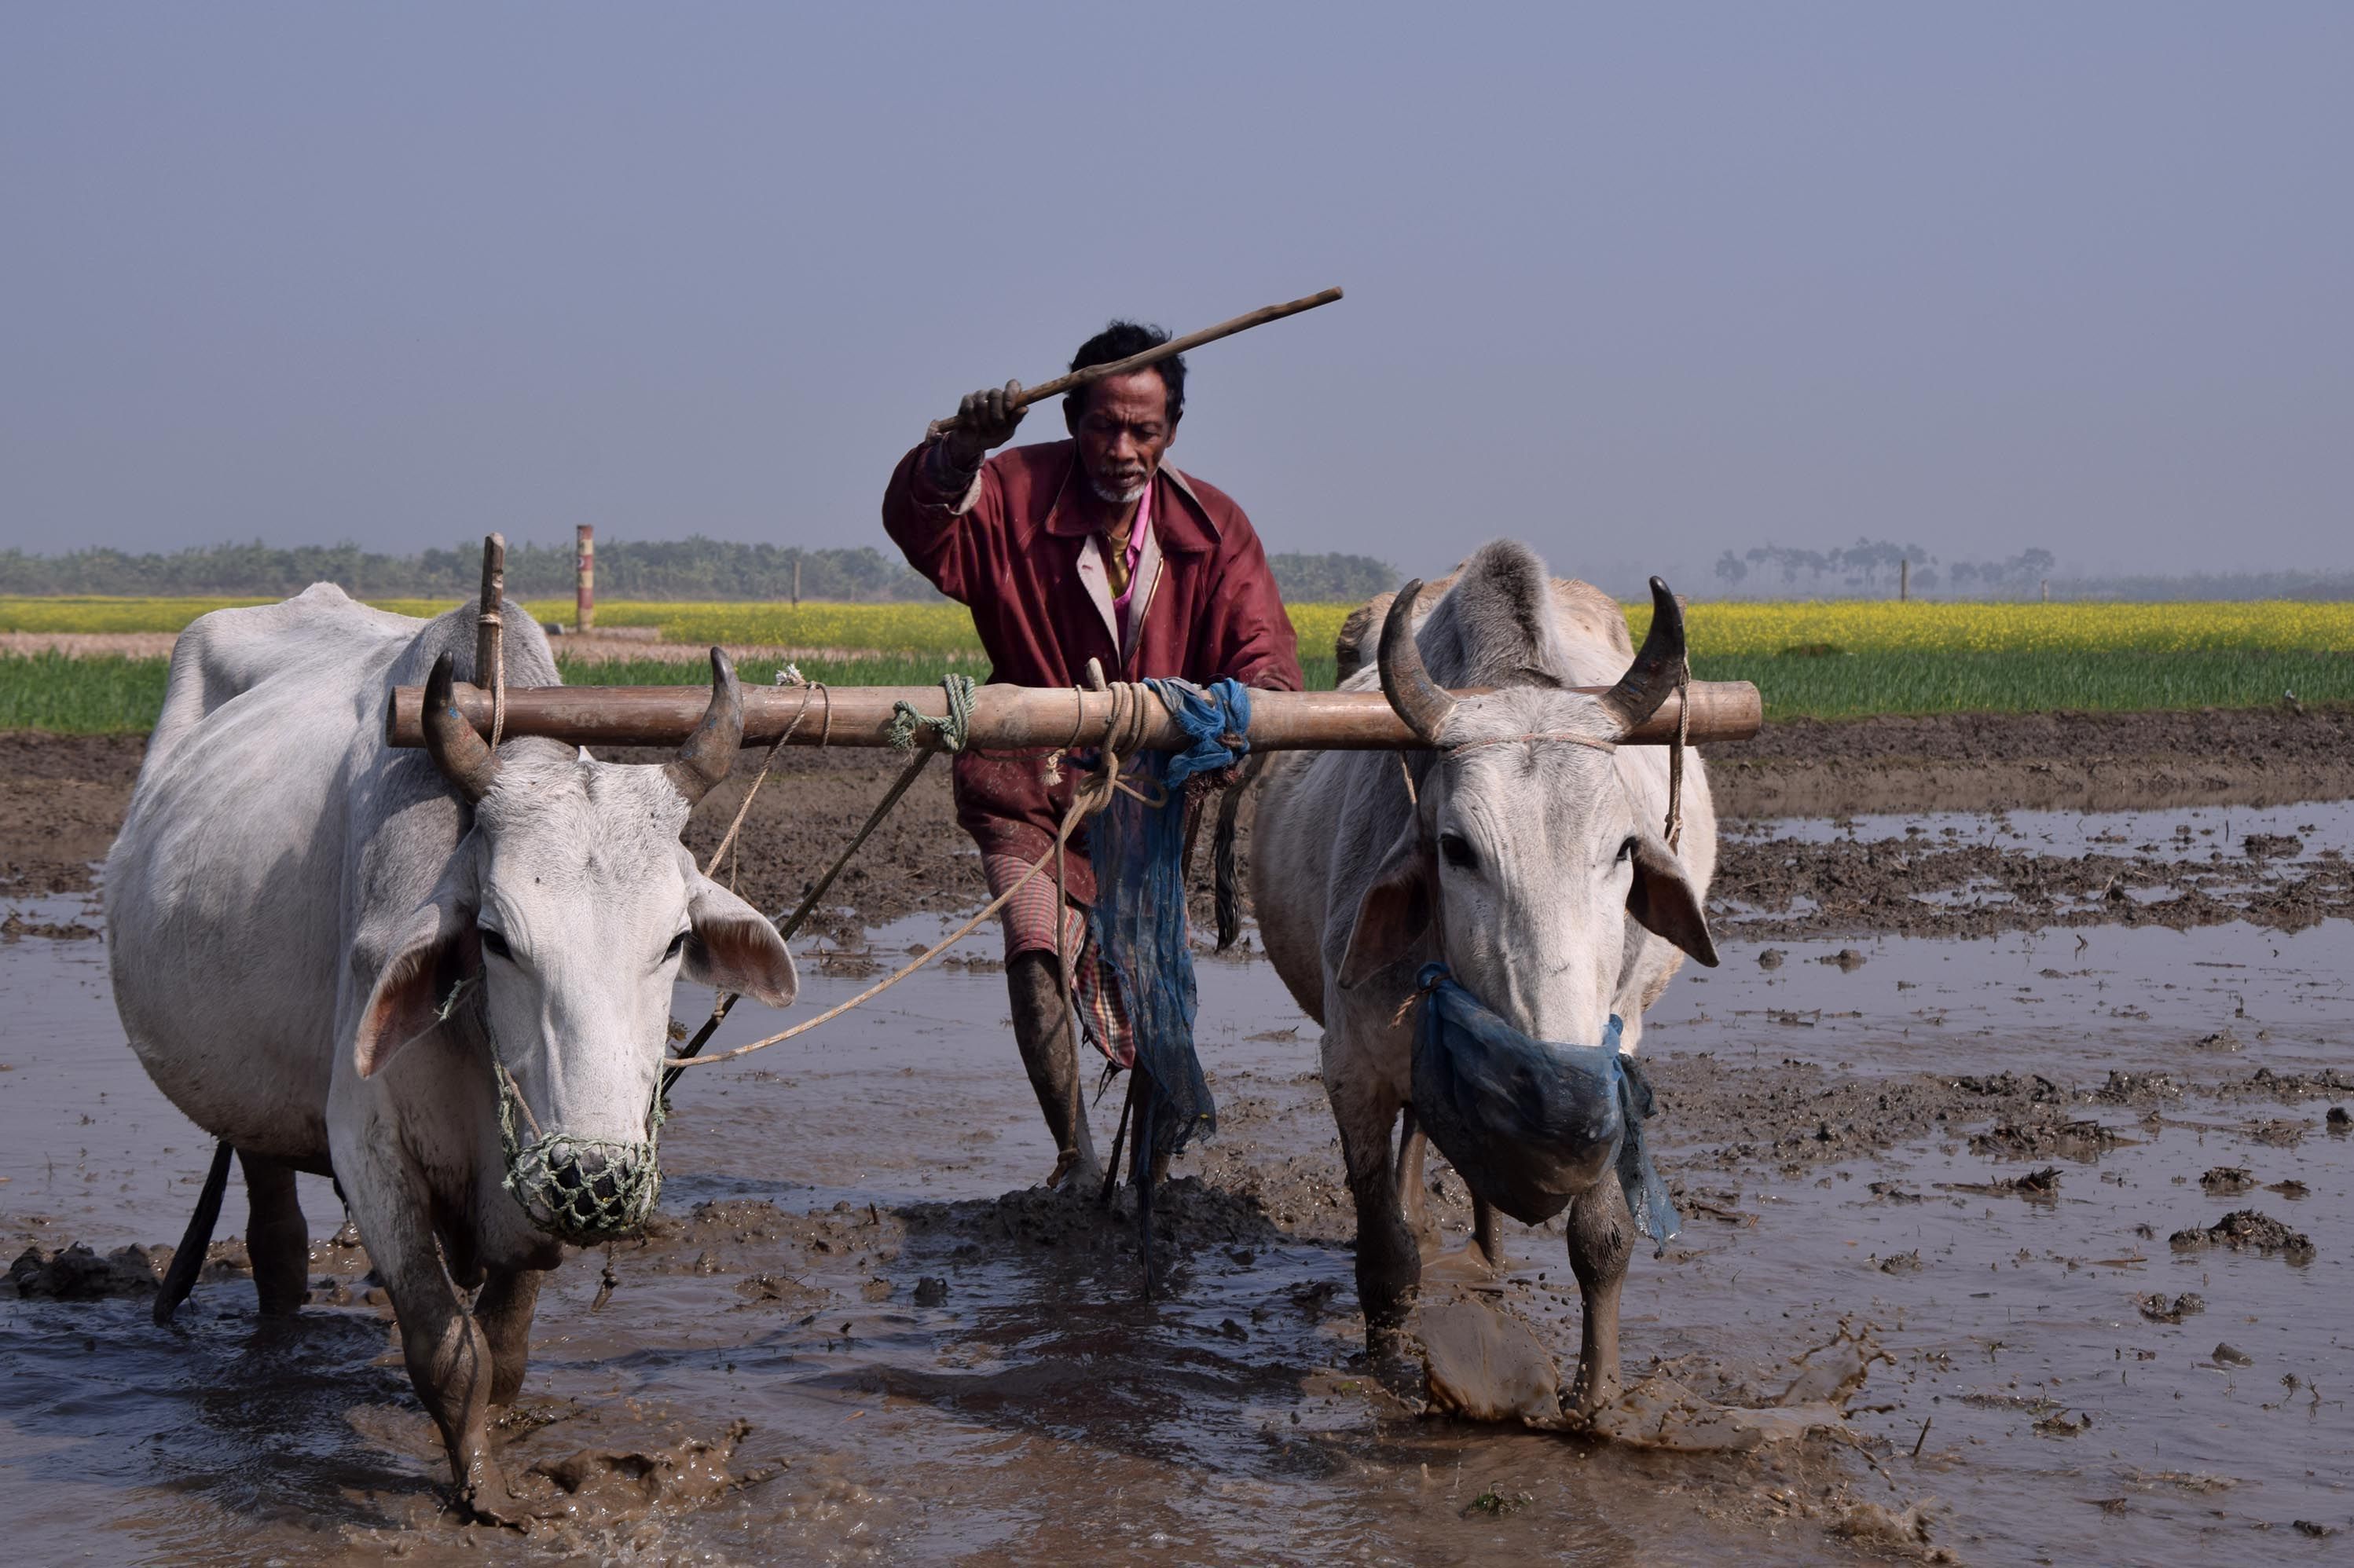 Saplings have been made in the seedbed of paddy, now the work of preparing the land is going on. In the winter morning, the farmer plows the field in the traditional way. The picture was taken from Kaikuri field in Karnahar of Paba upazila of Rajshahi.